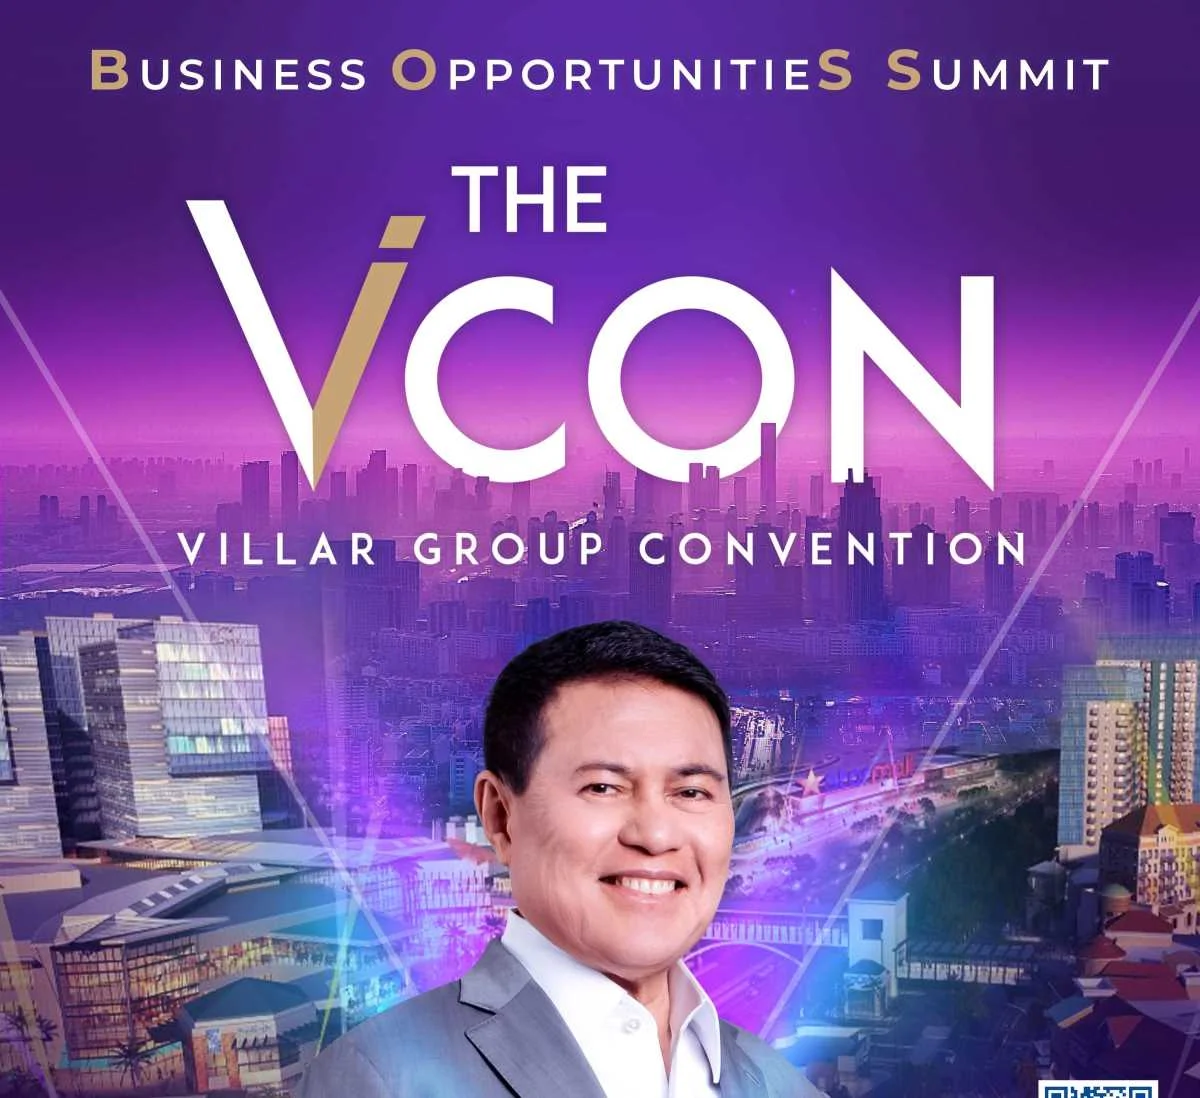 An Endless Earning Opportunity Awaits at the VICON Business Opportunities Summit